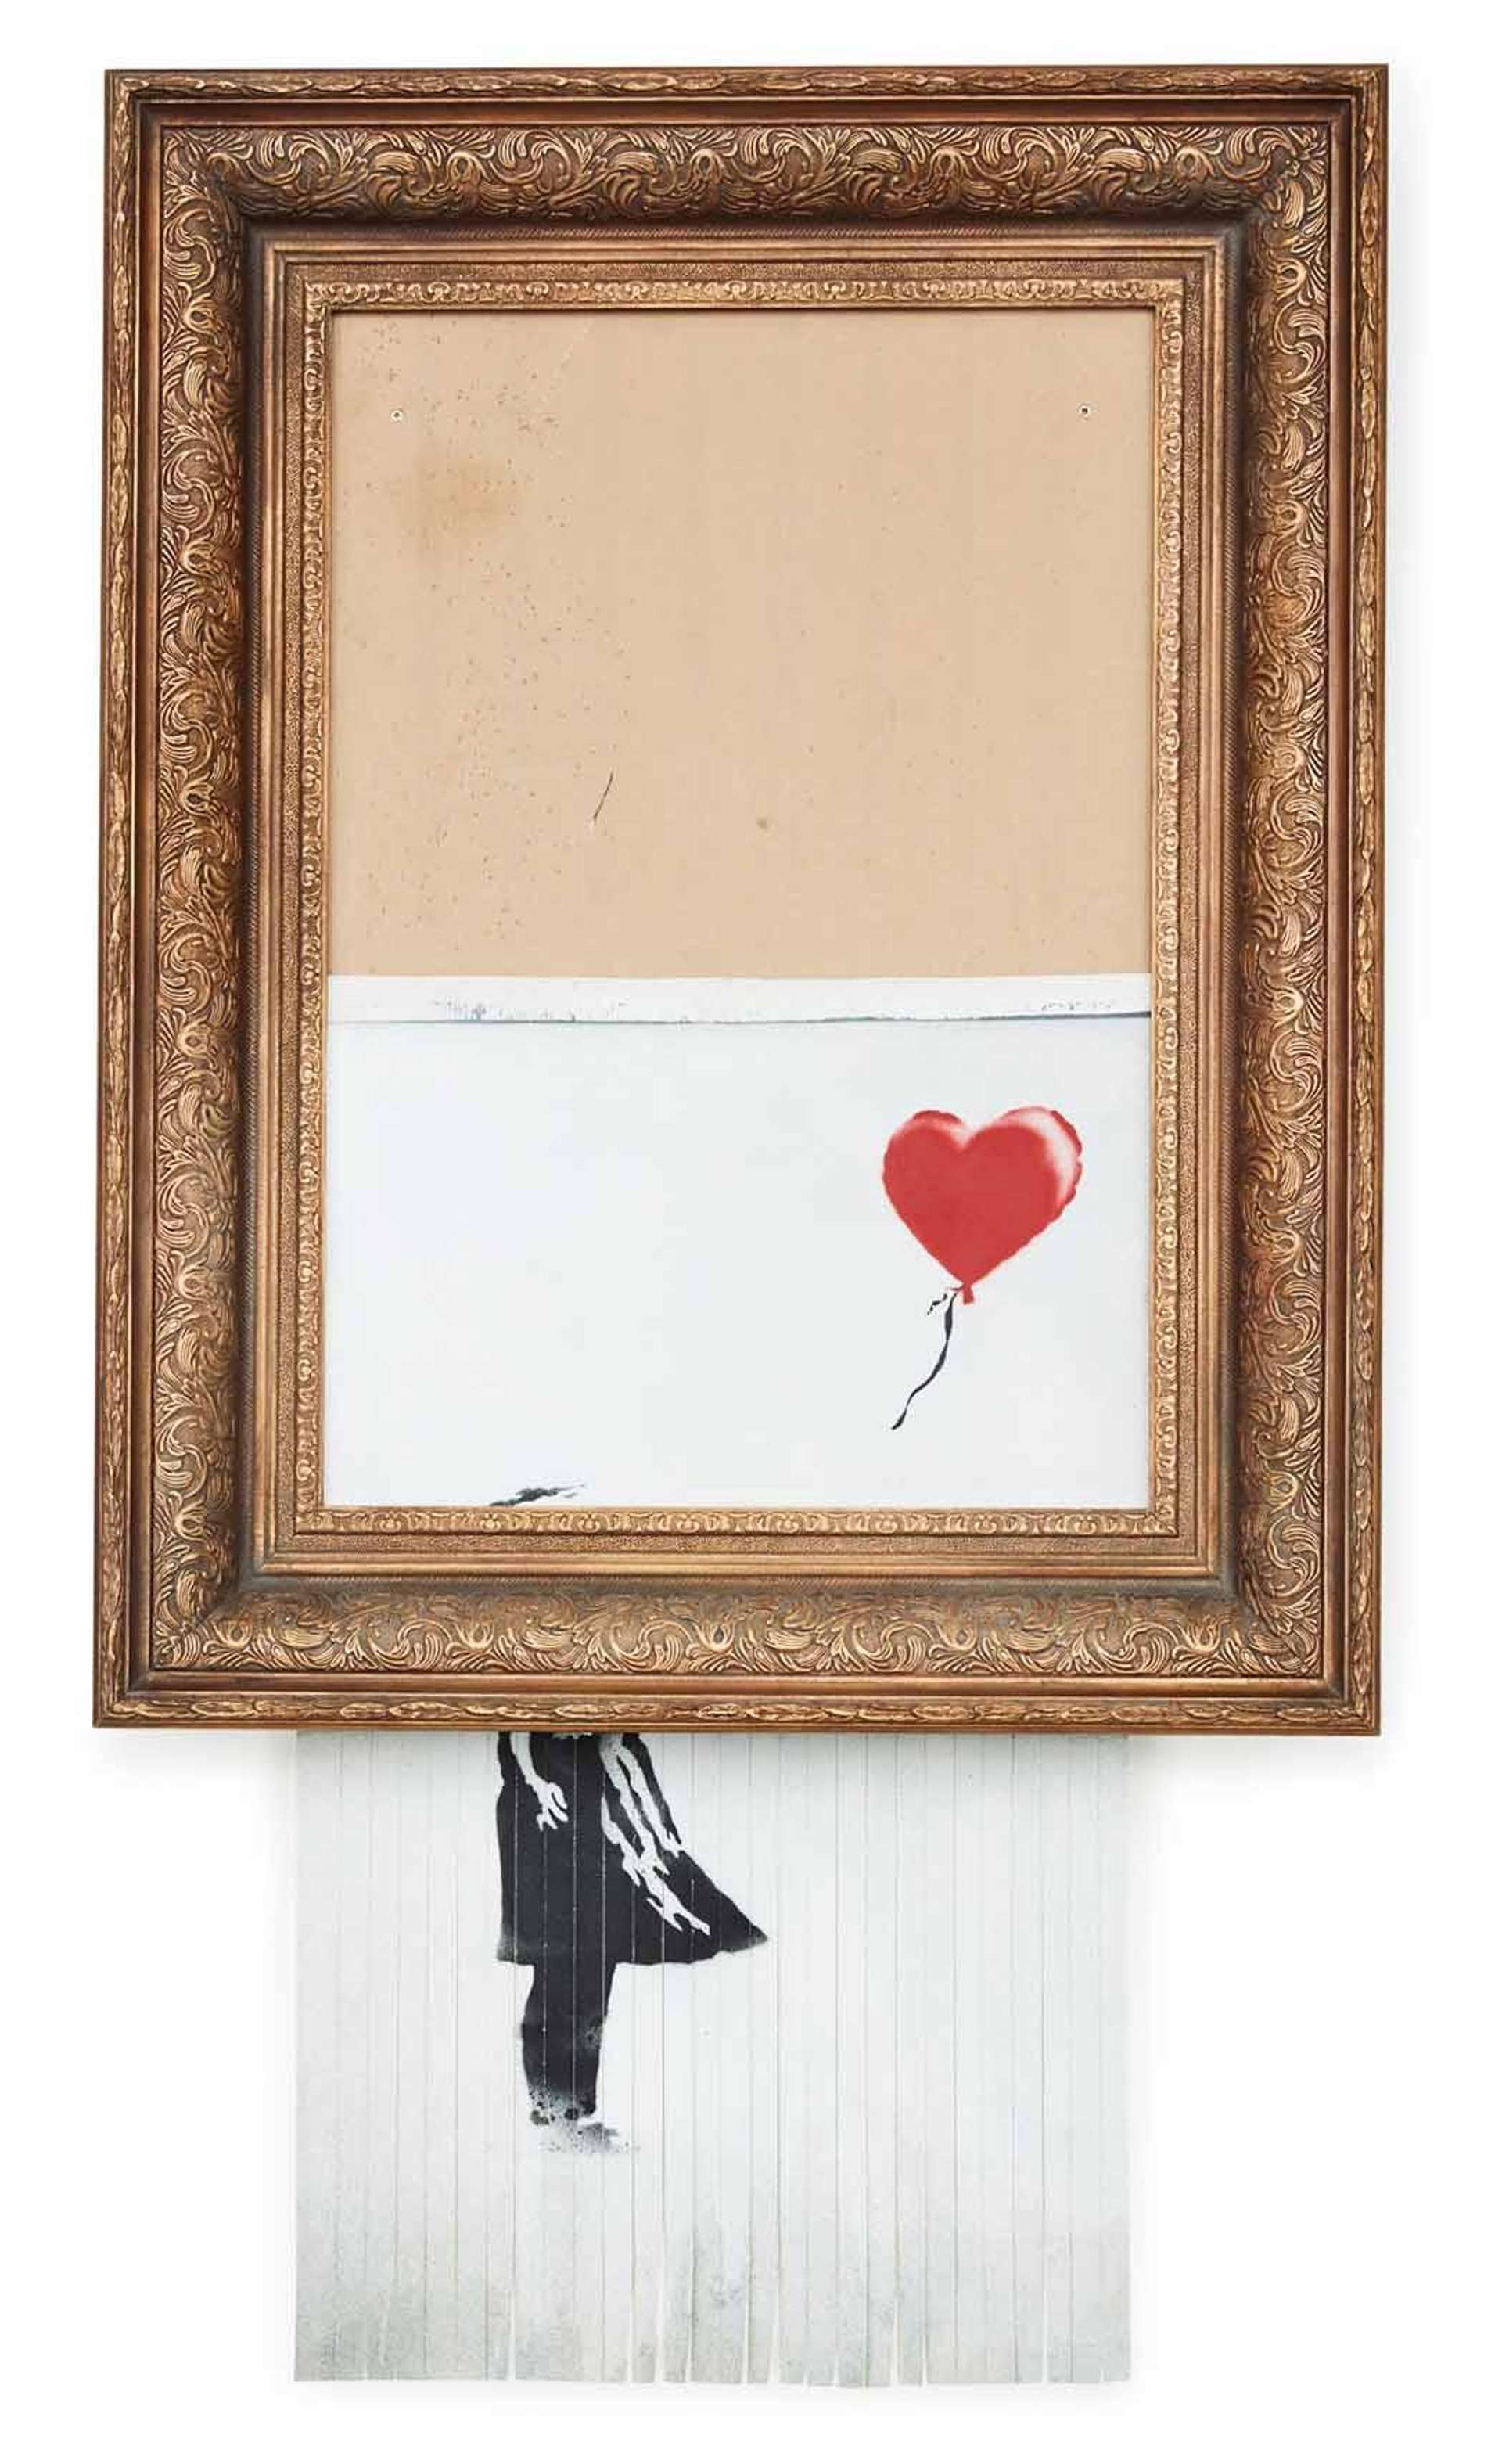 An image of Banksy's shredded Girl With Balloon painting, suspended from a gold gilt frame